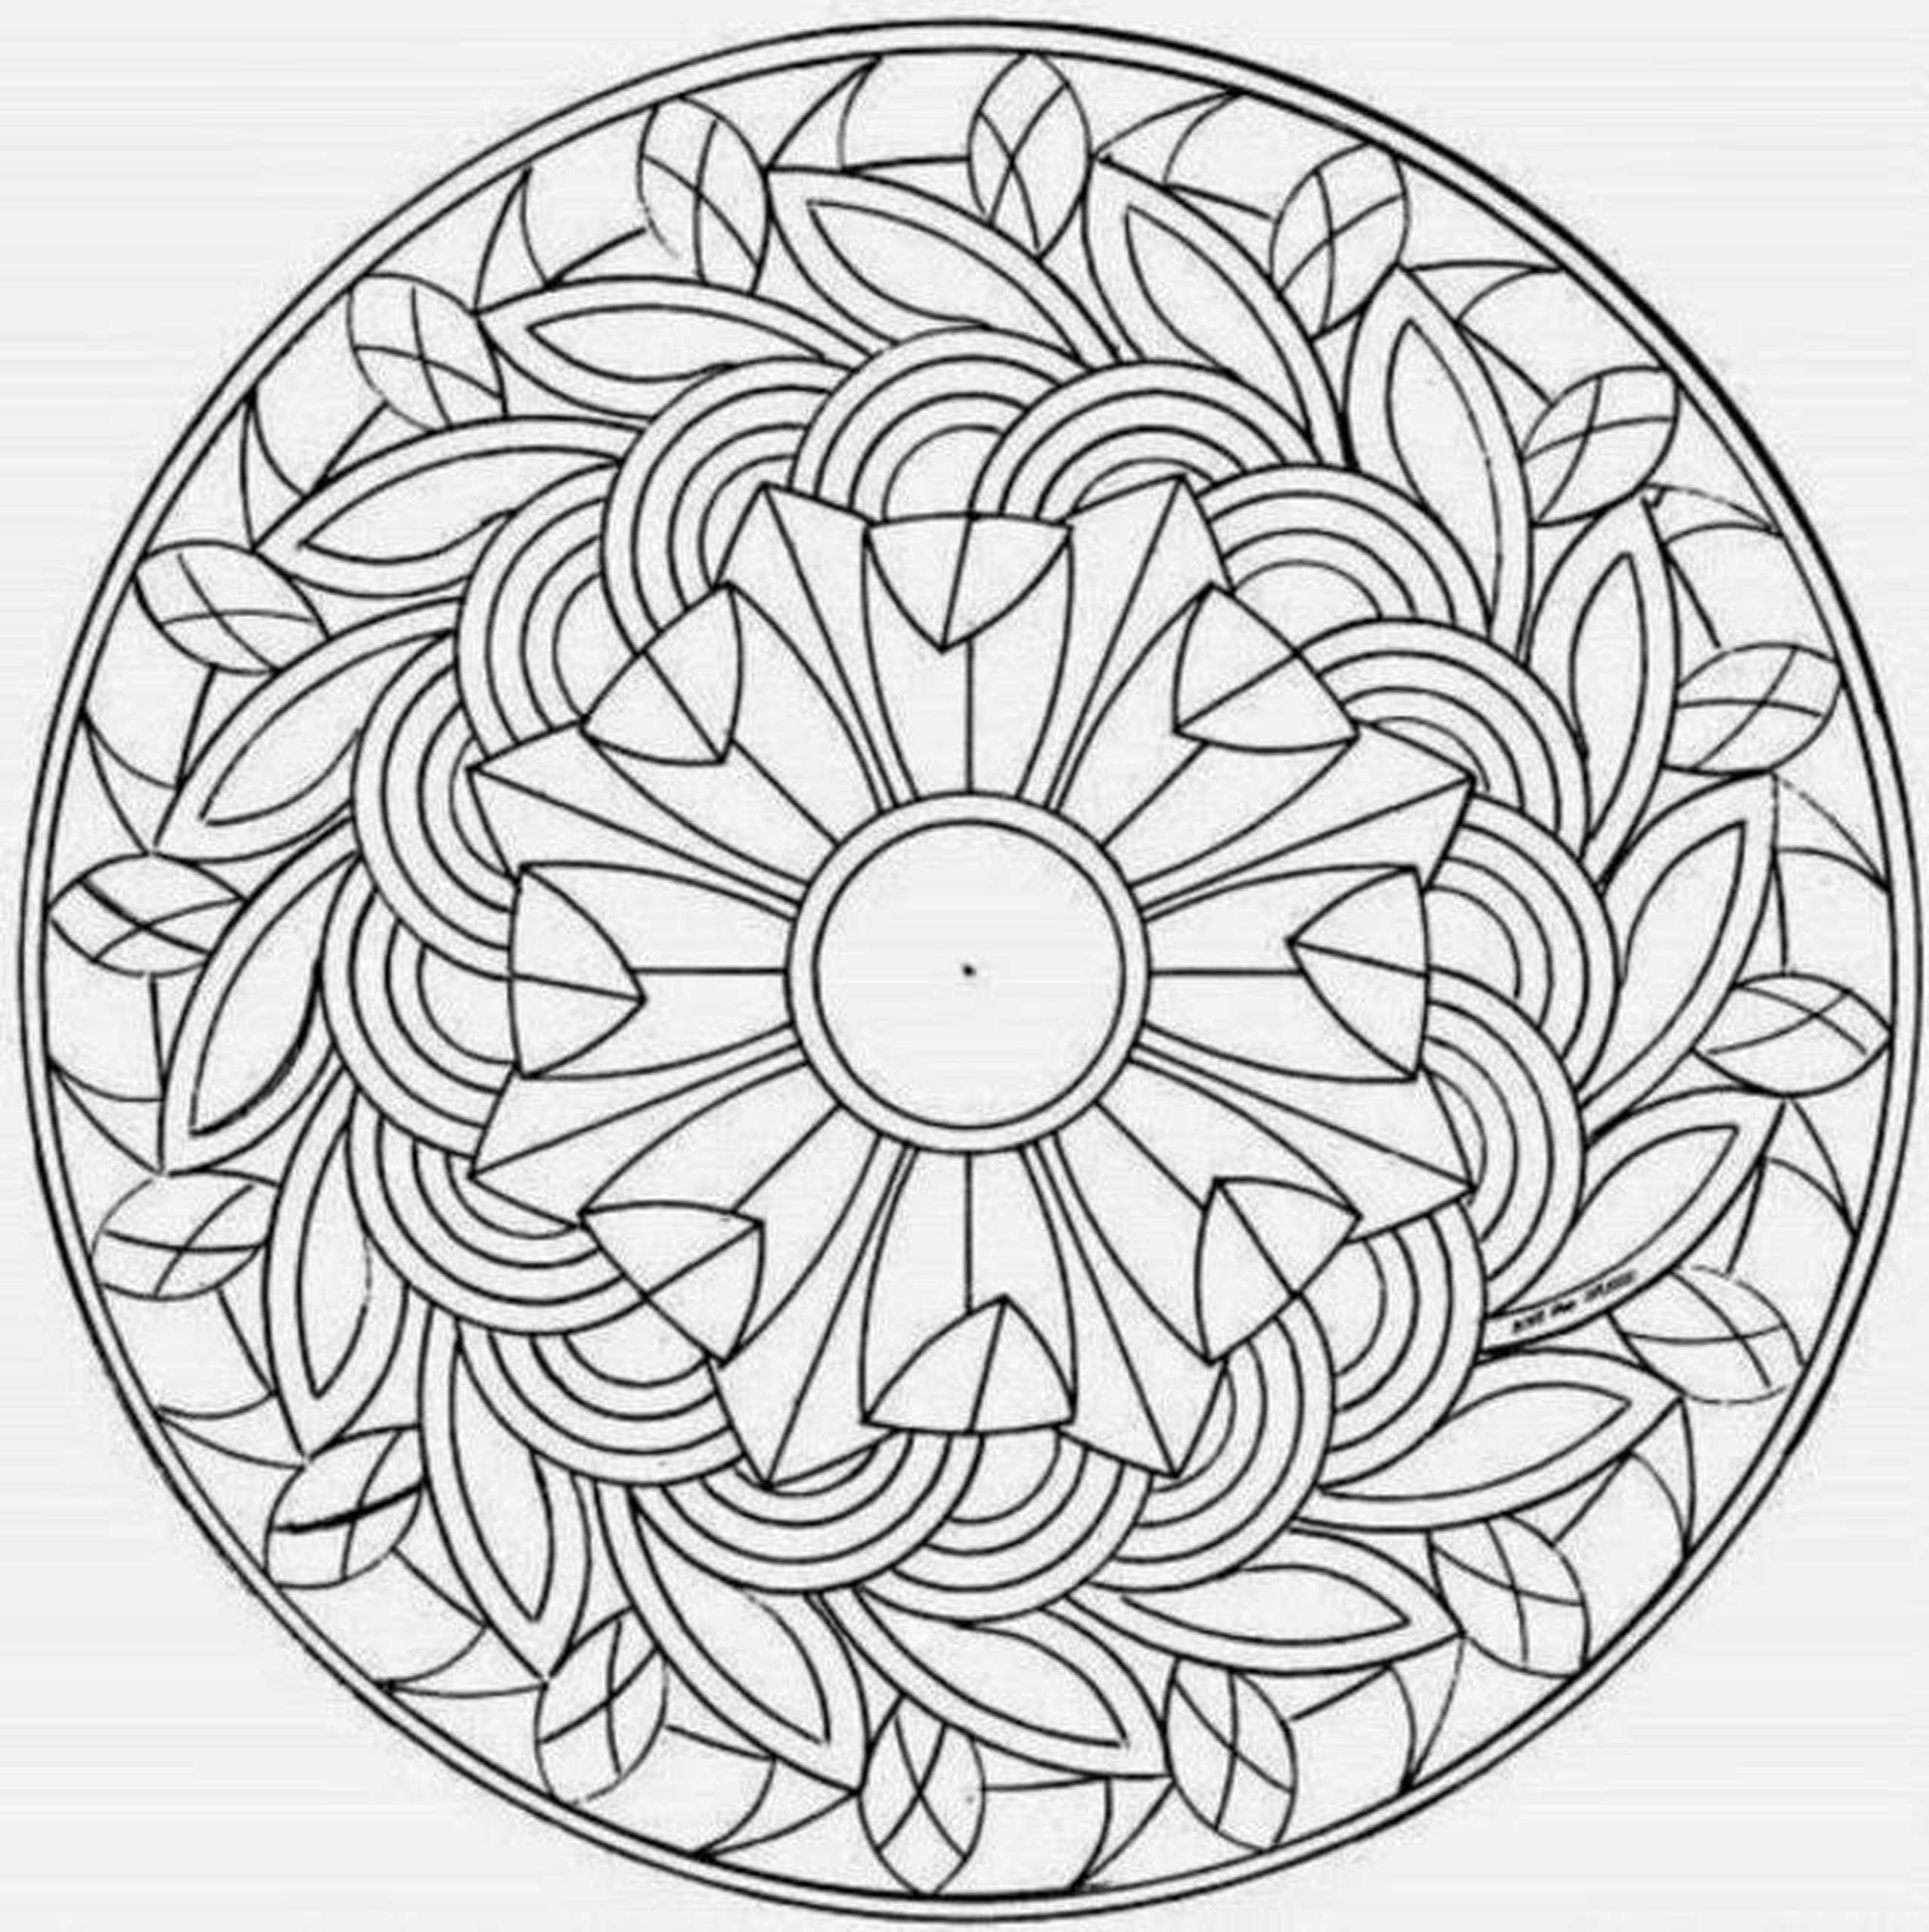 Print & Download - Coloring Pages for Girls, Recommend a Hobby To A Child